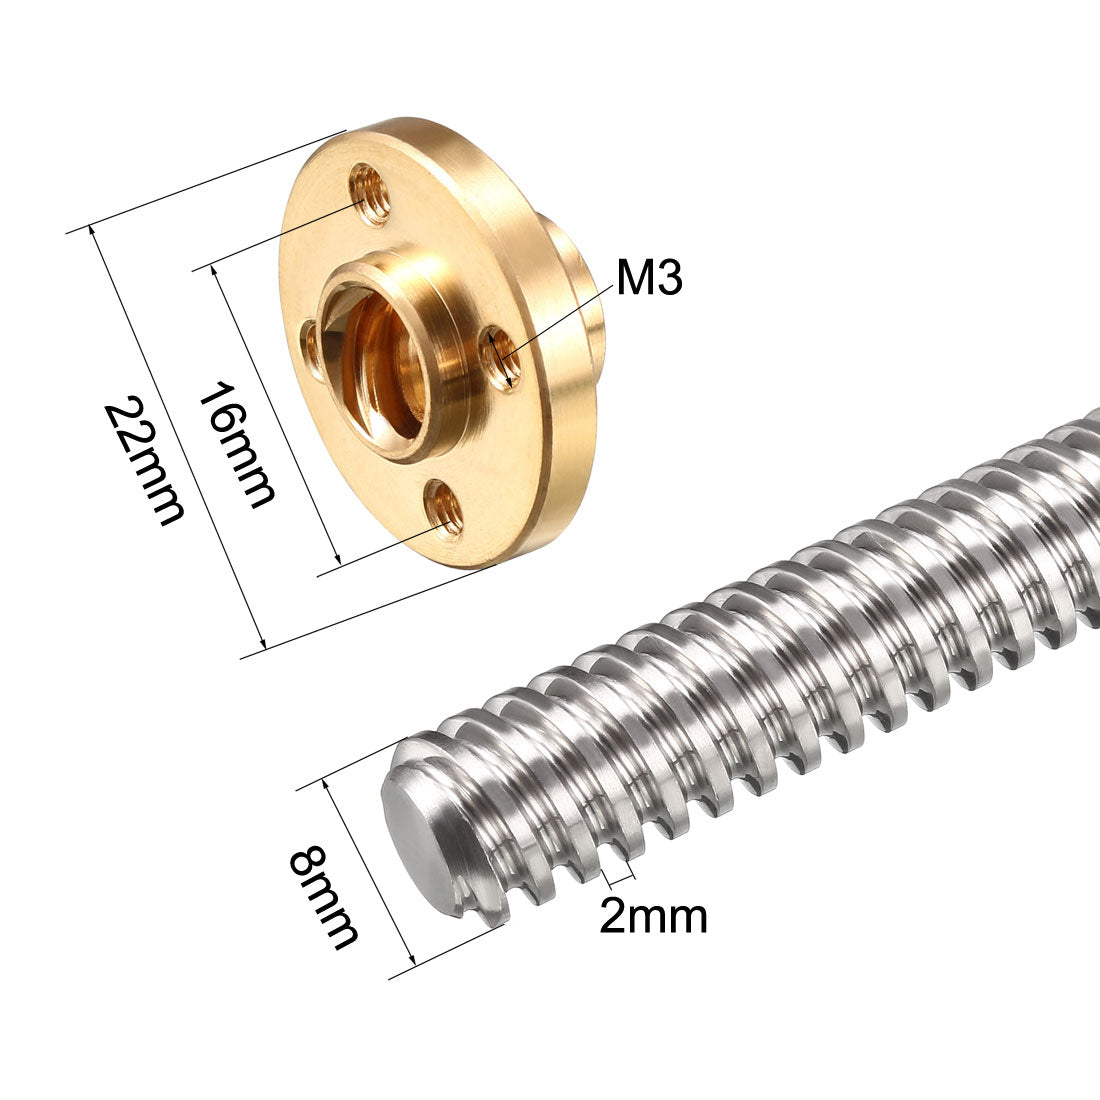 uxcell Uxcell 200mm T8 Pitch 2mm Lead 8mm Lead Screw Rod with Copper Nut for 3D Printer